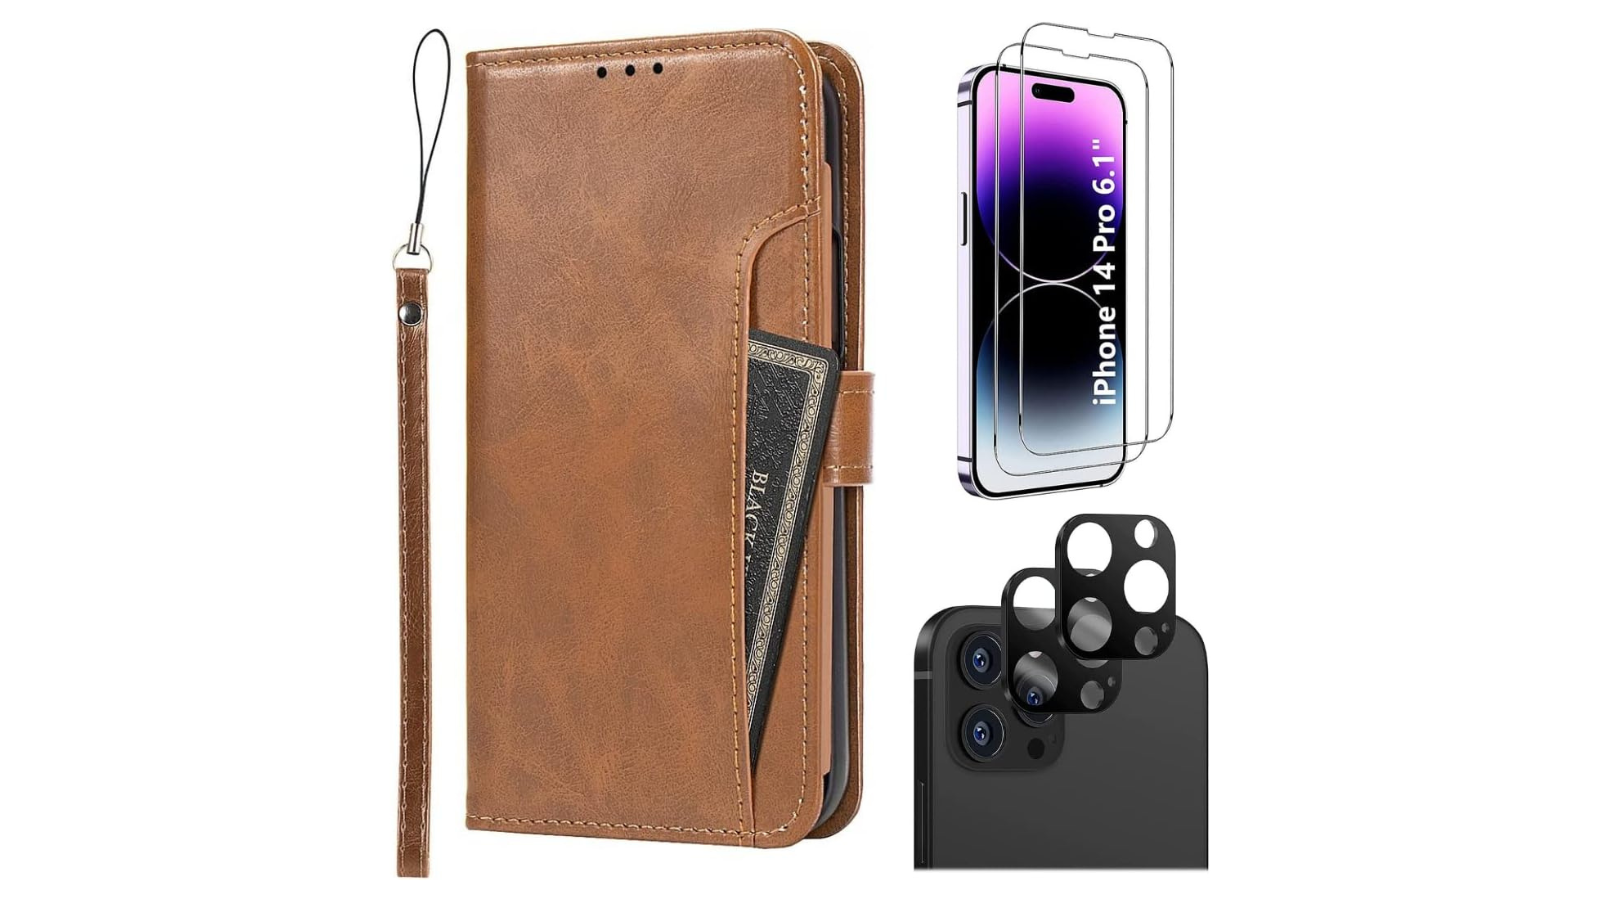 SaharaCase iPhone 14 Pro 6.1-inch Protection Kit Bundle - Folio Wallet Case with Tempered Glass Screen and Camera Protector (Brown)